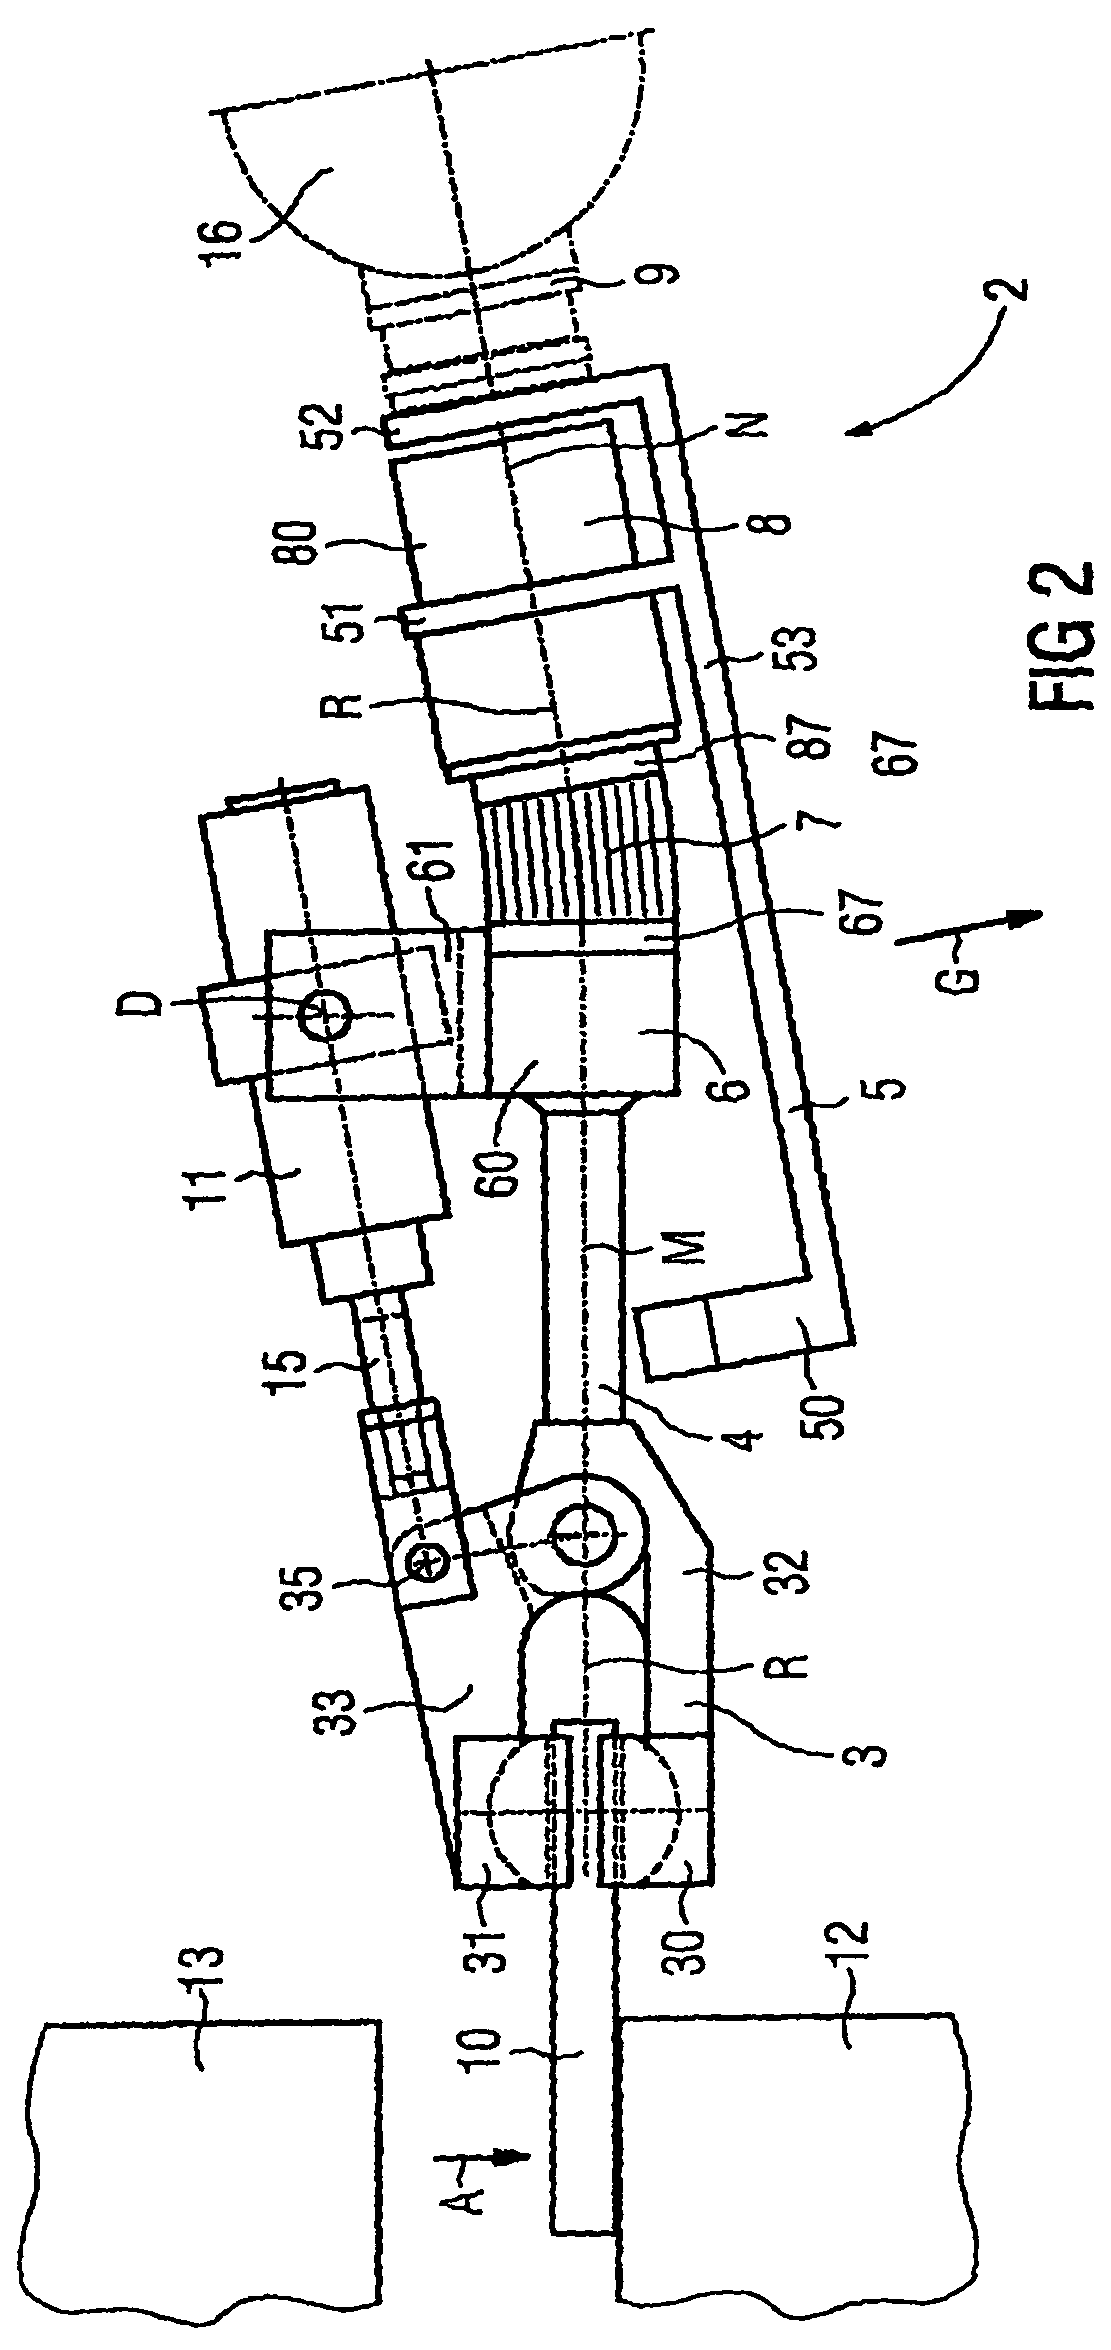 Device for handling a workpiece during a shaping process